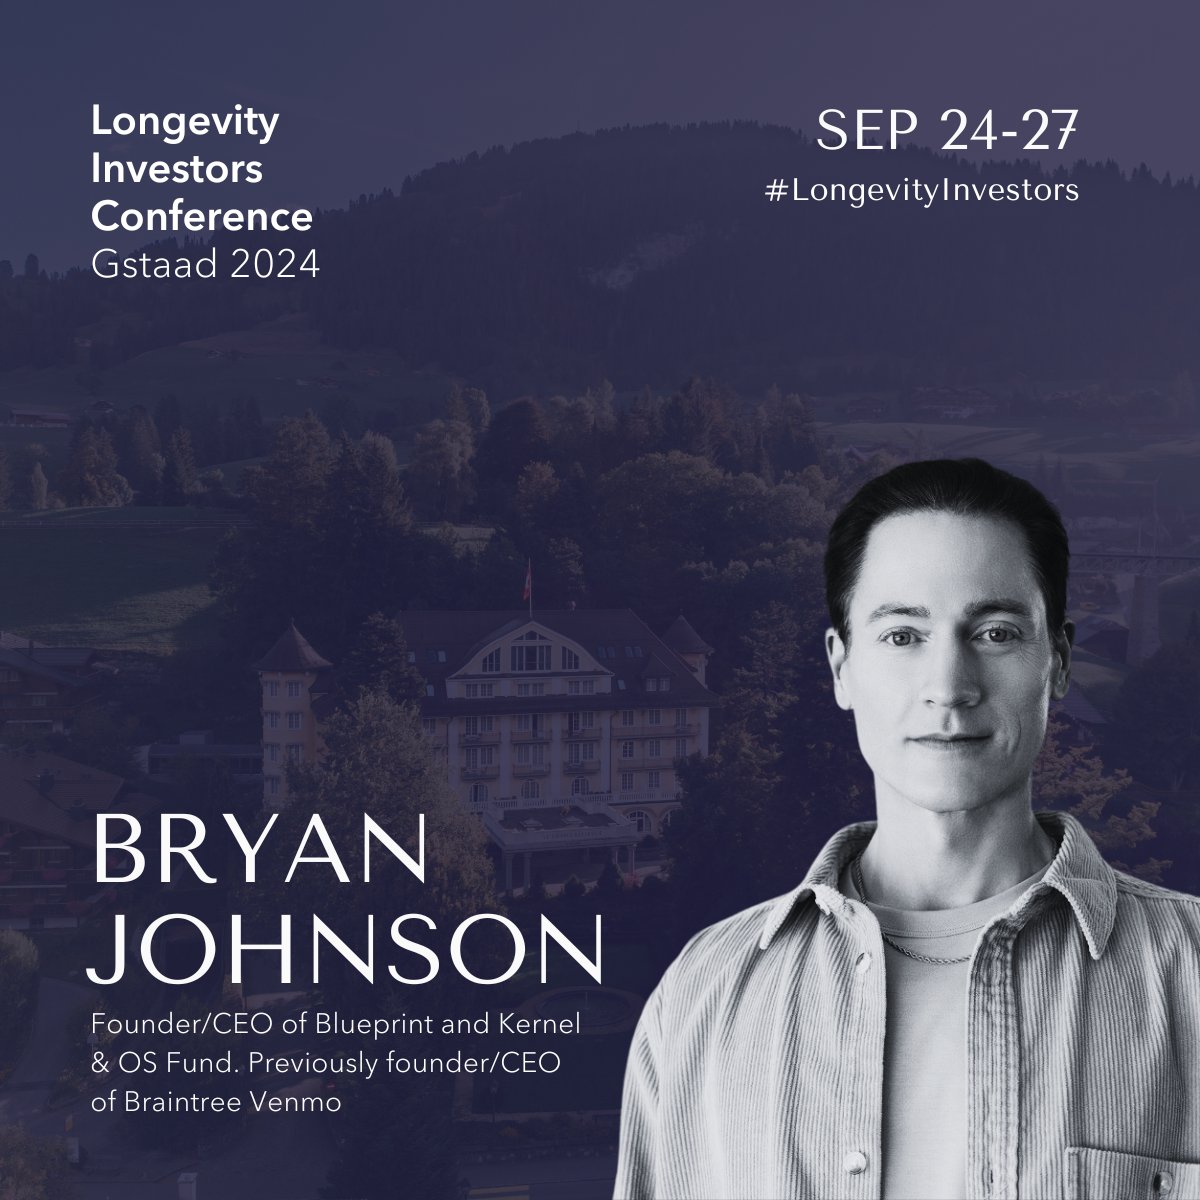 We're thrilled to announce that @bryan_johnson, the world's most measured human and visionary entrepreneur, will be joining us as a speaker at the Longevity Investors Conference 2024, held at the exquisite @BellevueGstaad in Gstaad, Switzerland. 🚀 From selling Braintree Venmo…